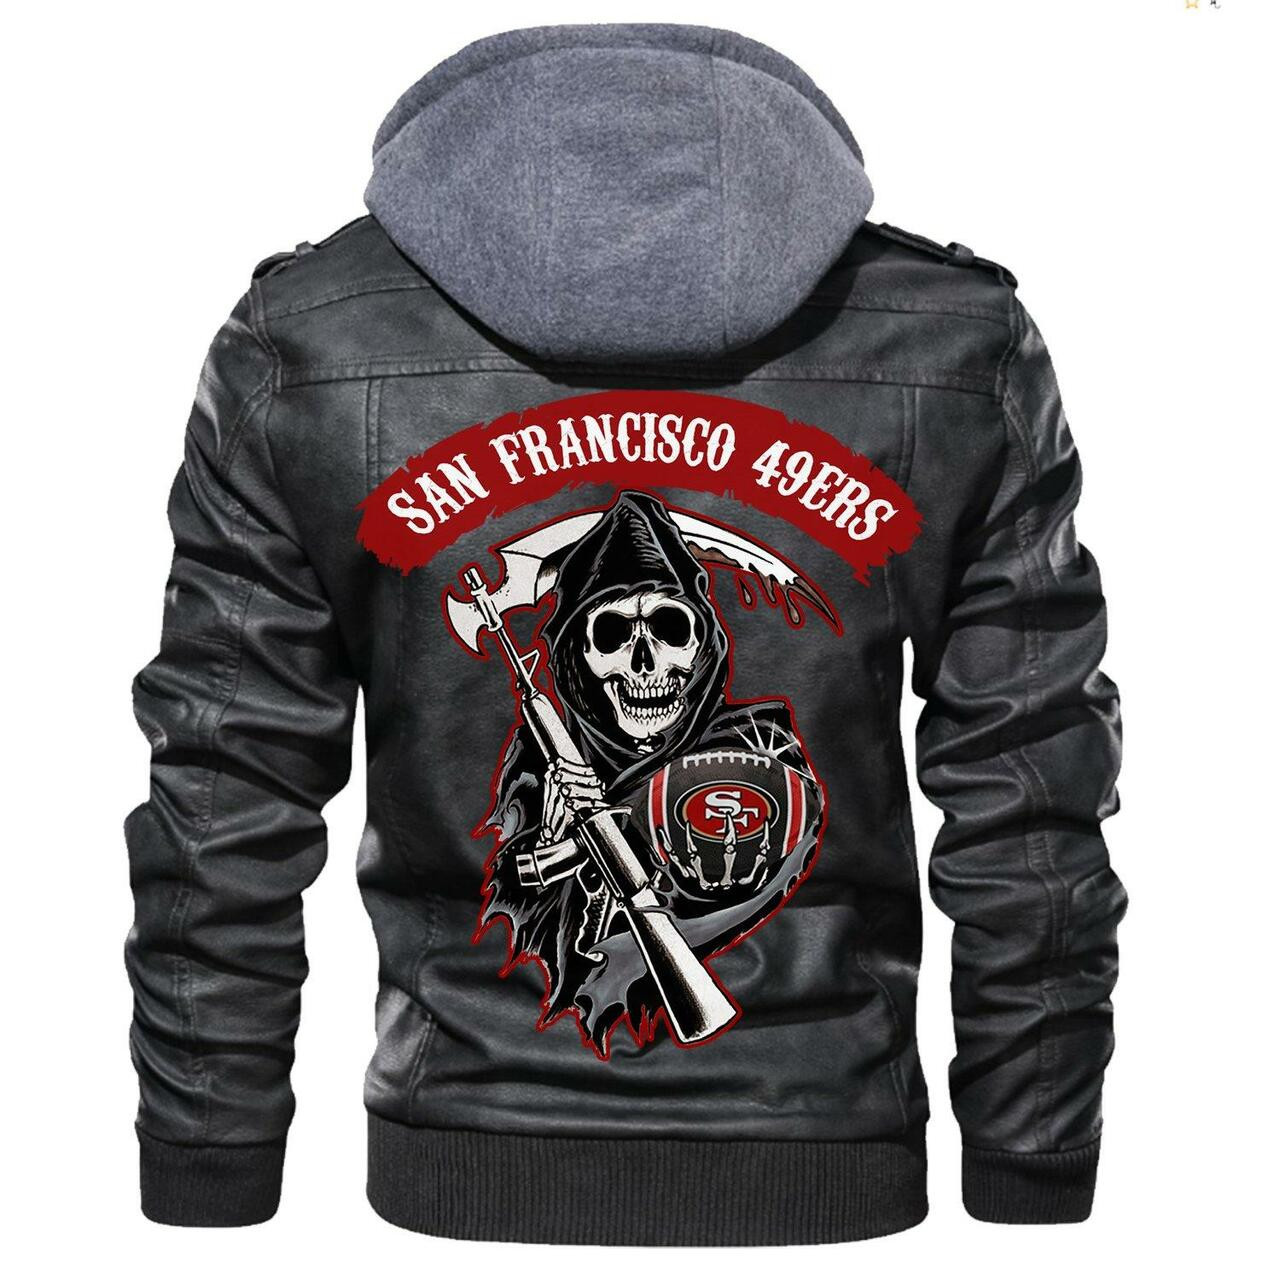 Our store has all of the latest leather jacket 139